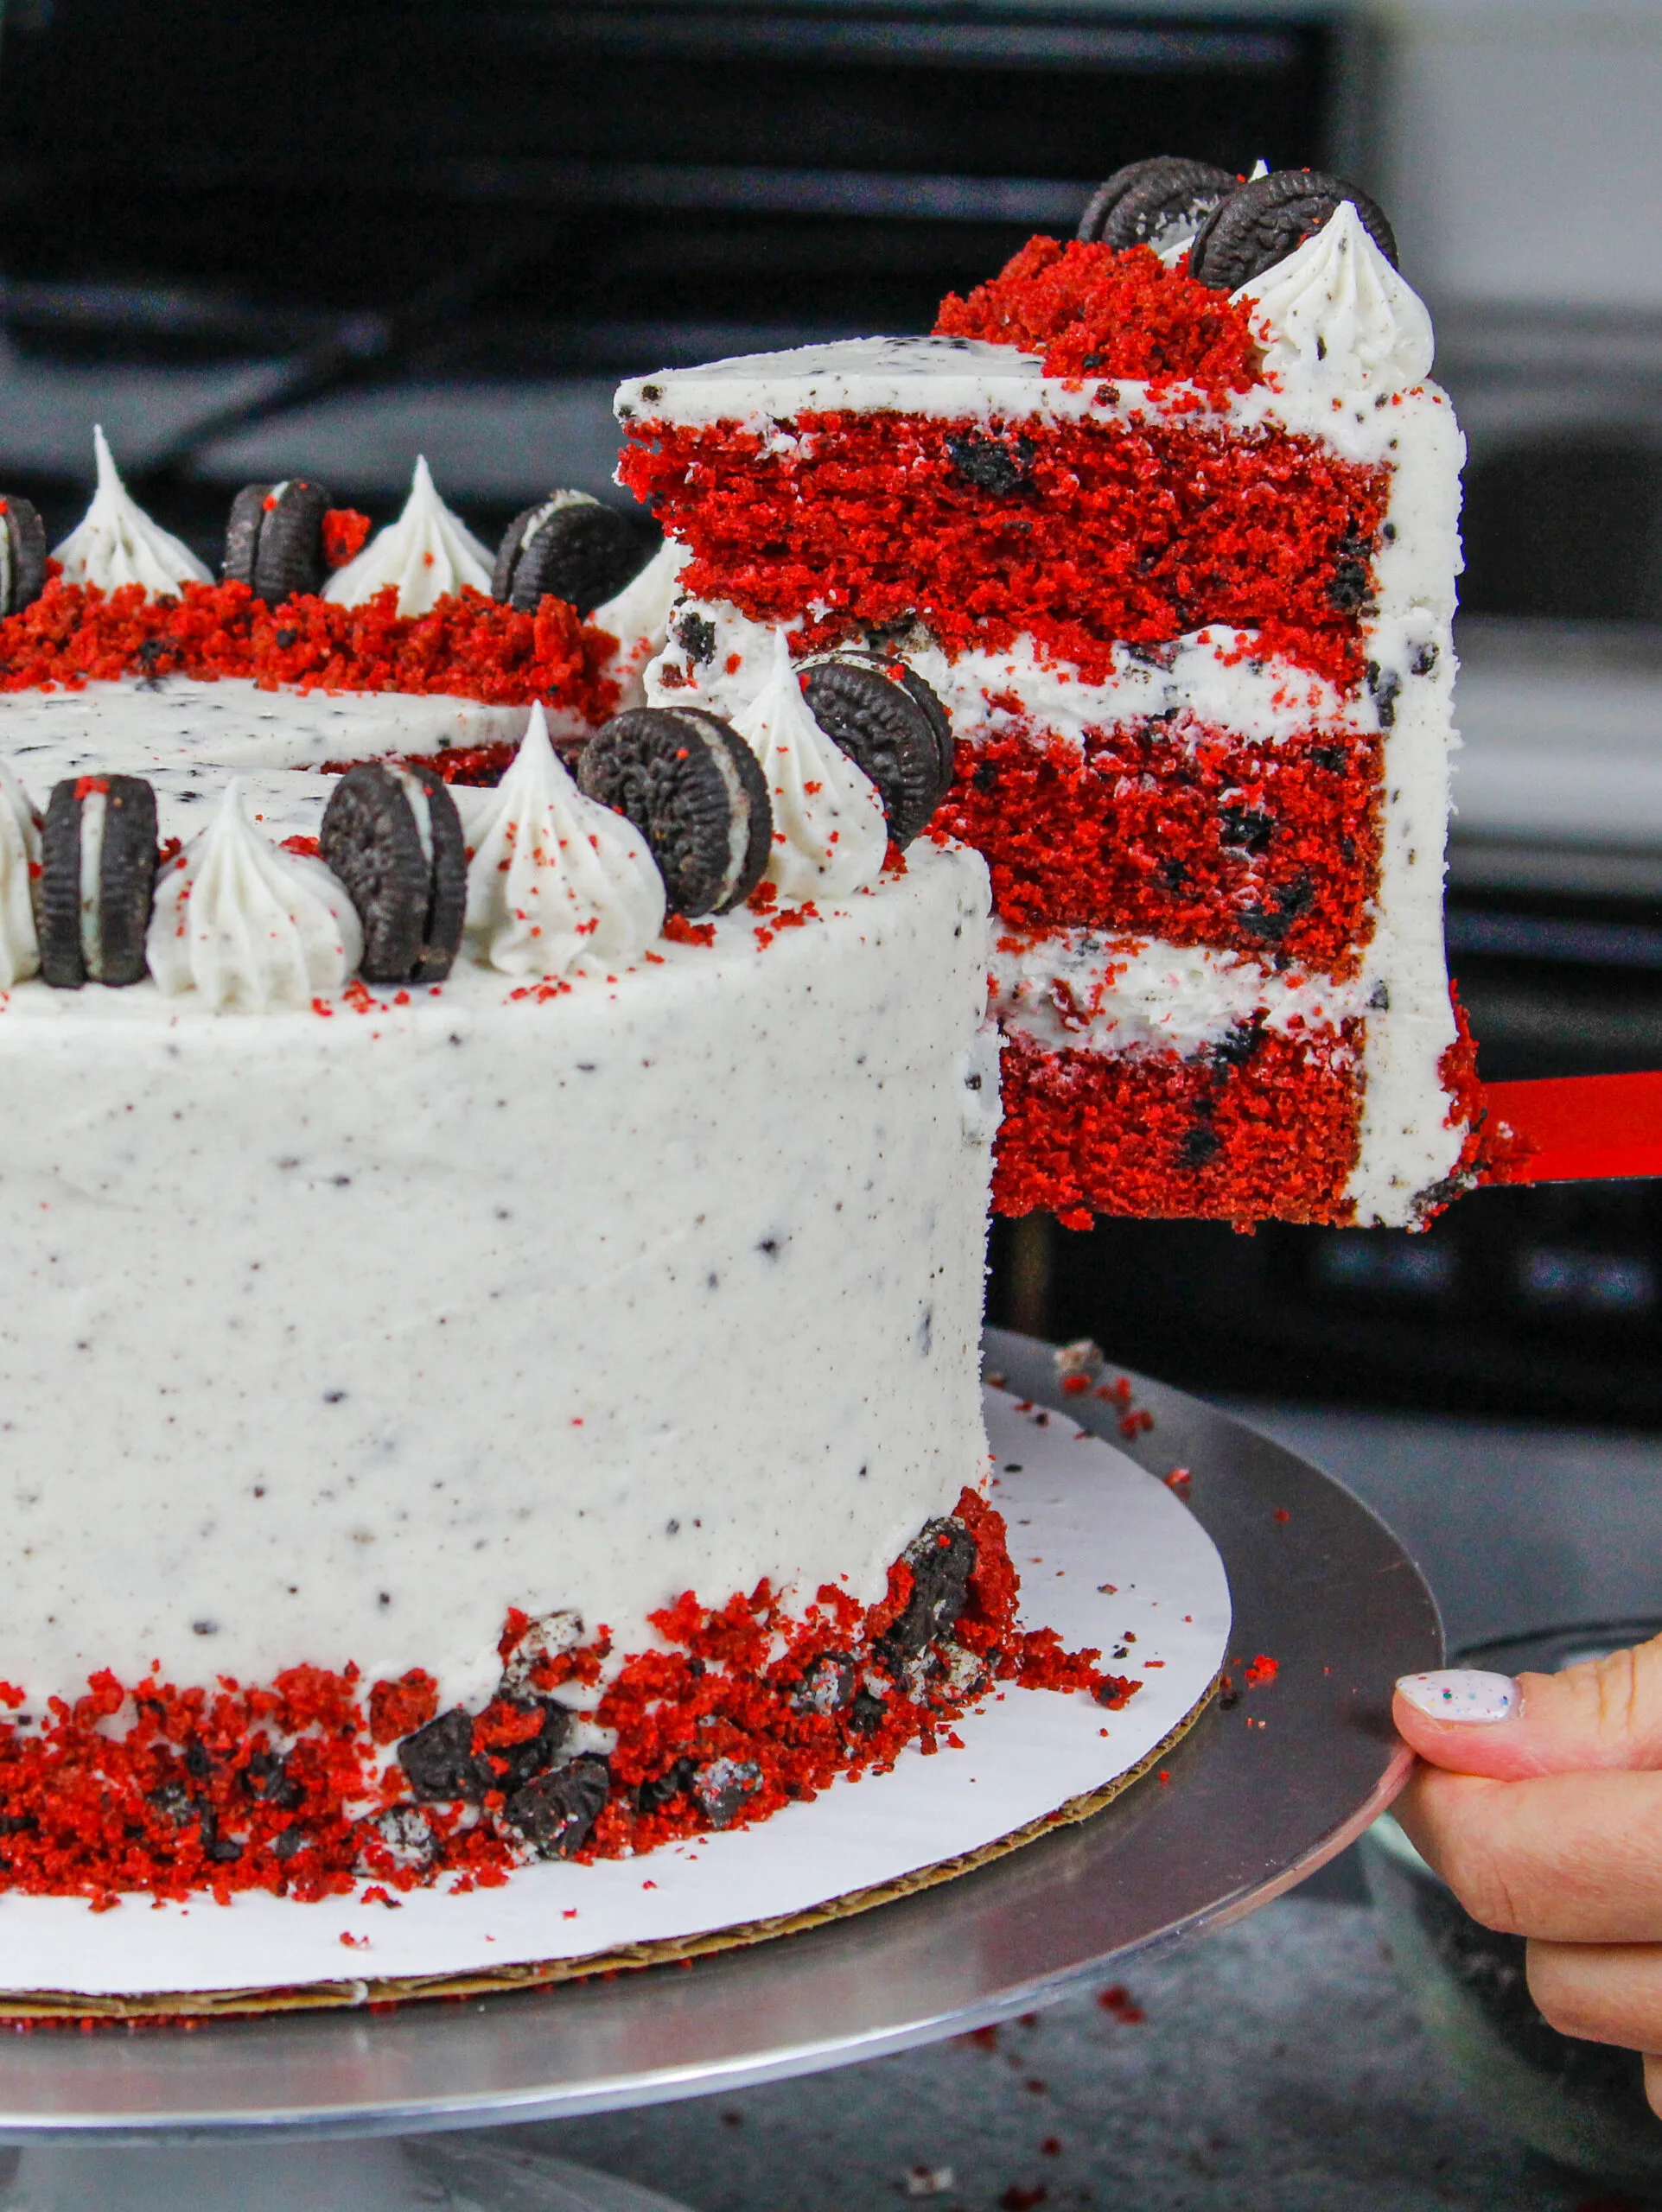 image of a red velvet oreo cake slice being pulled out of a cake